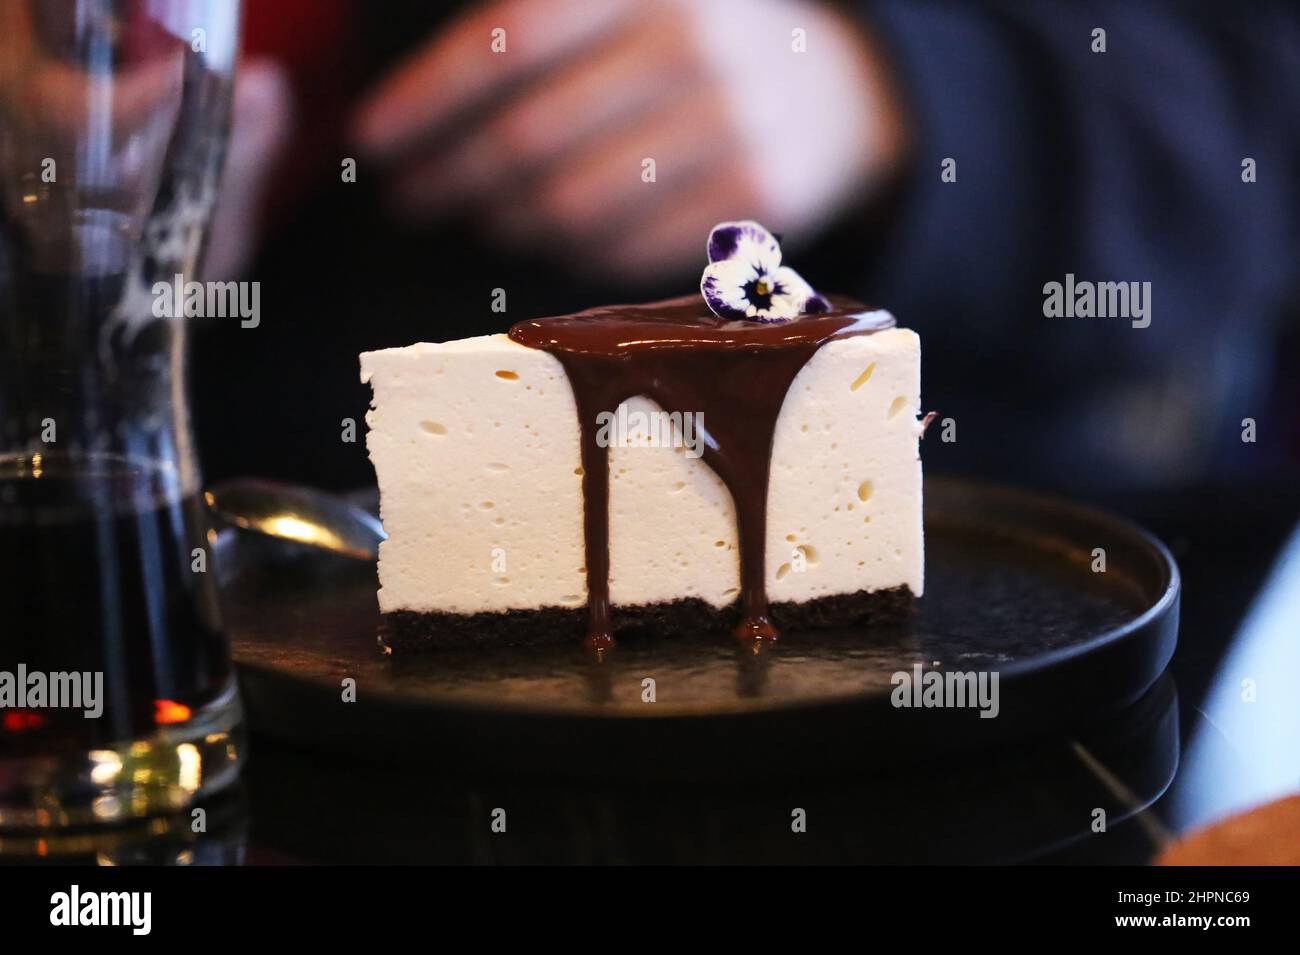 Beautiful delicious cheesecake with chocolate on a plate take a close-up photo Stock Photo